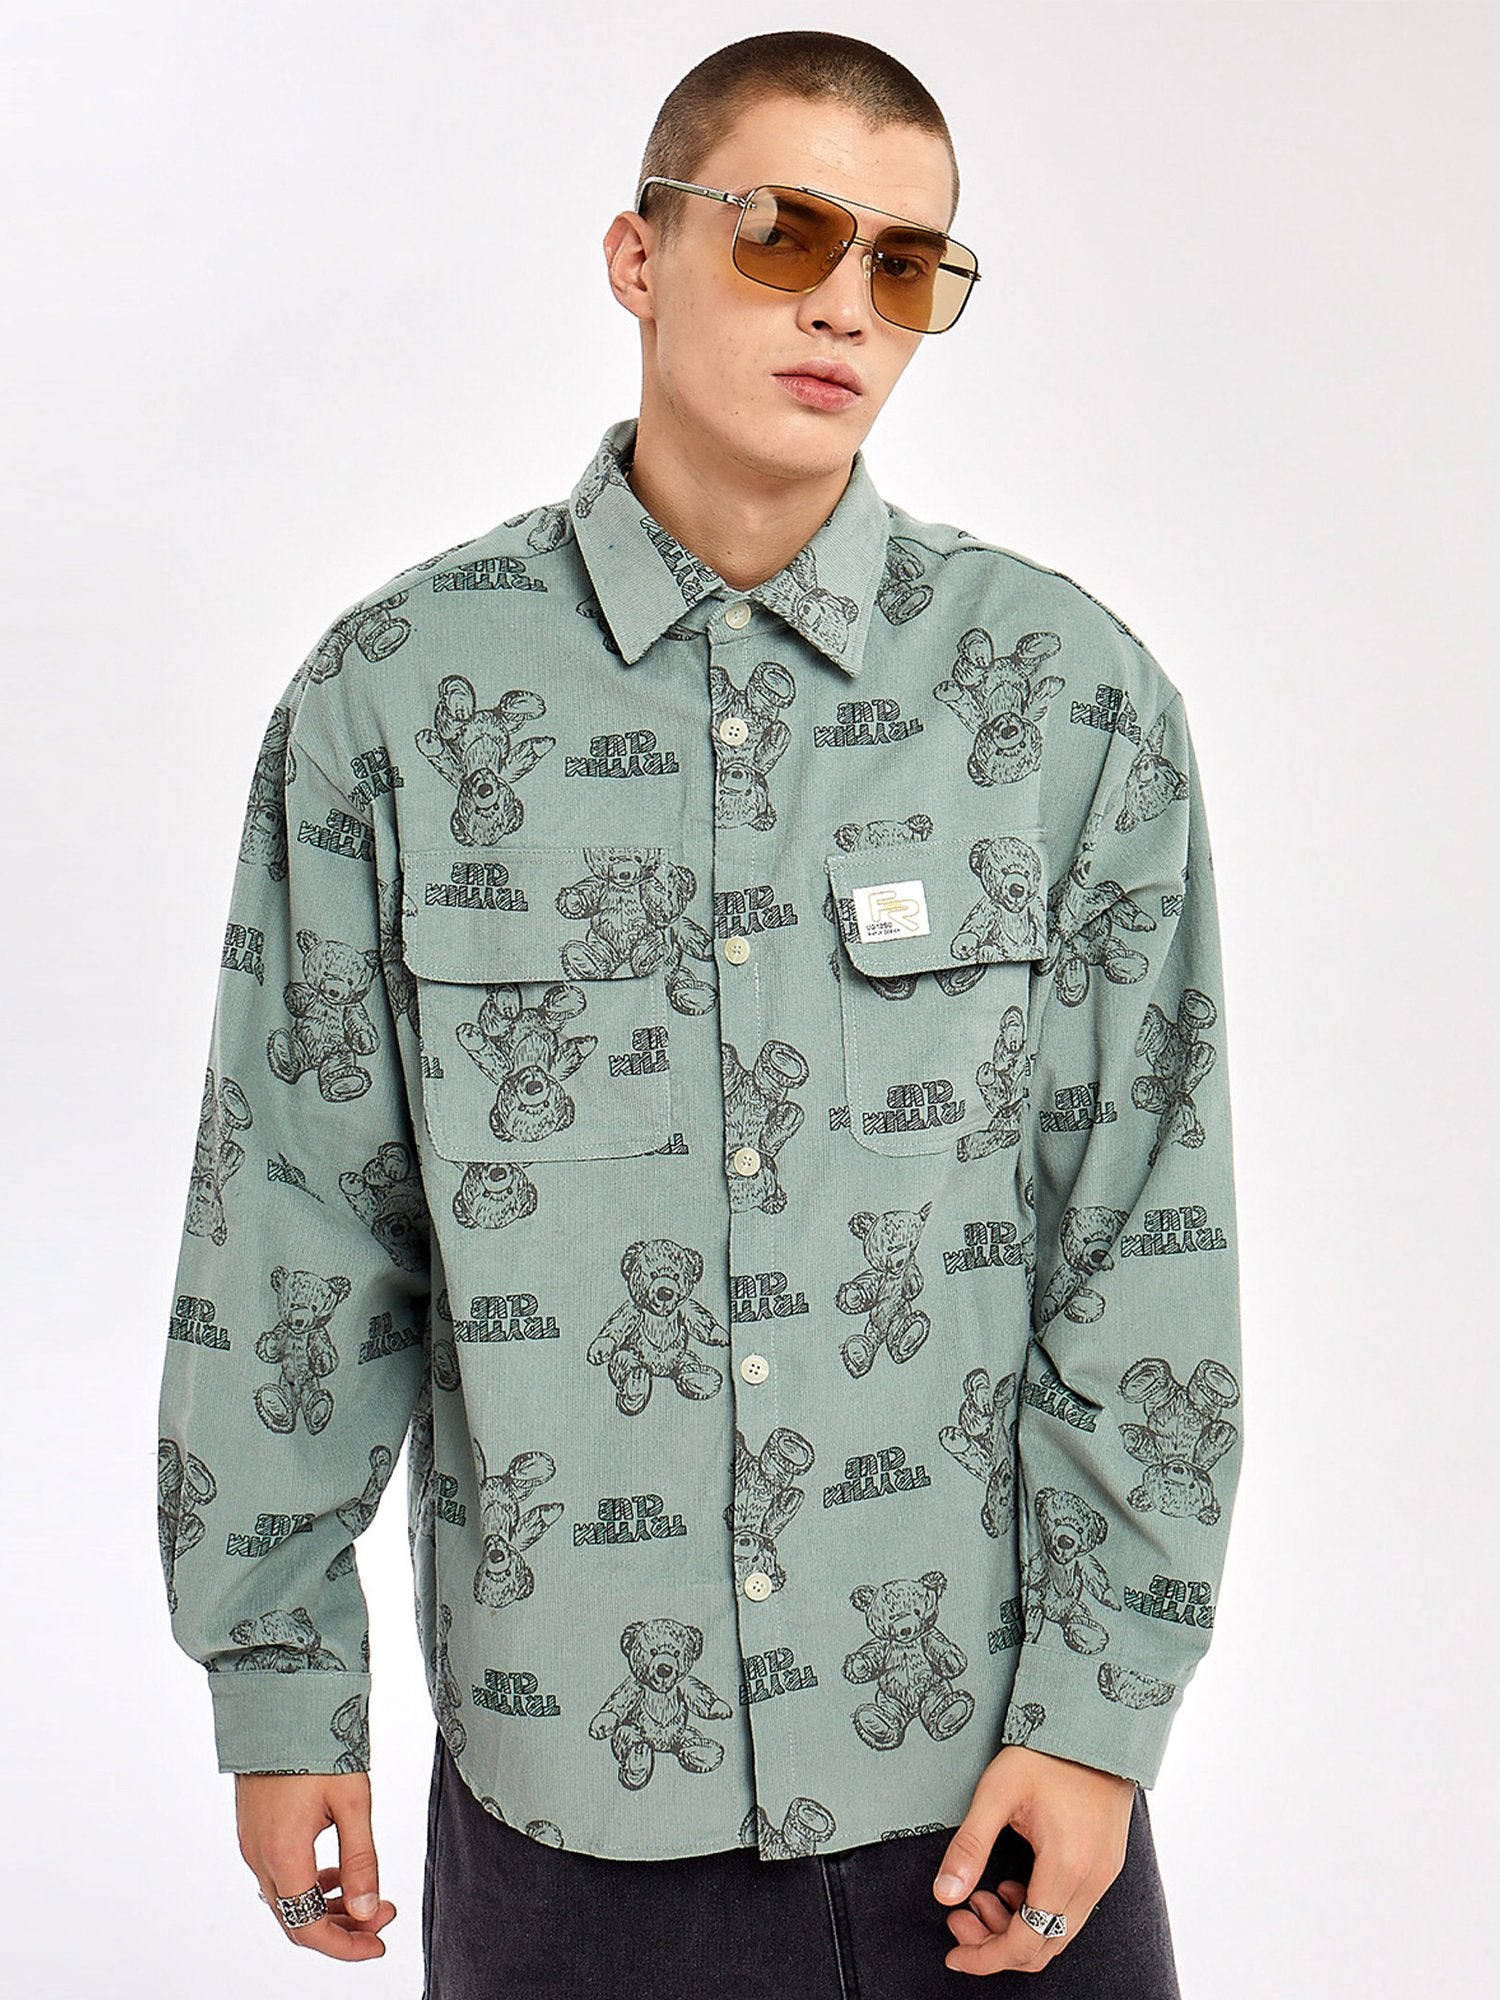 Printed Cotton Turn-down Collar Shirts full Sleevs for men's